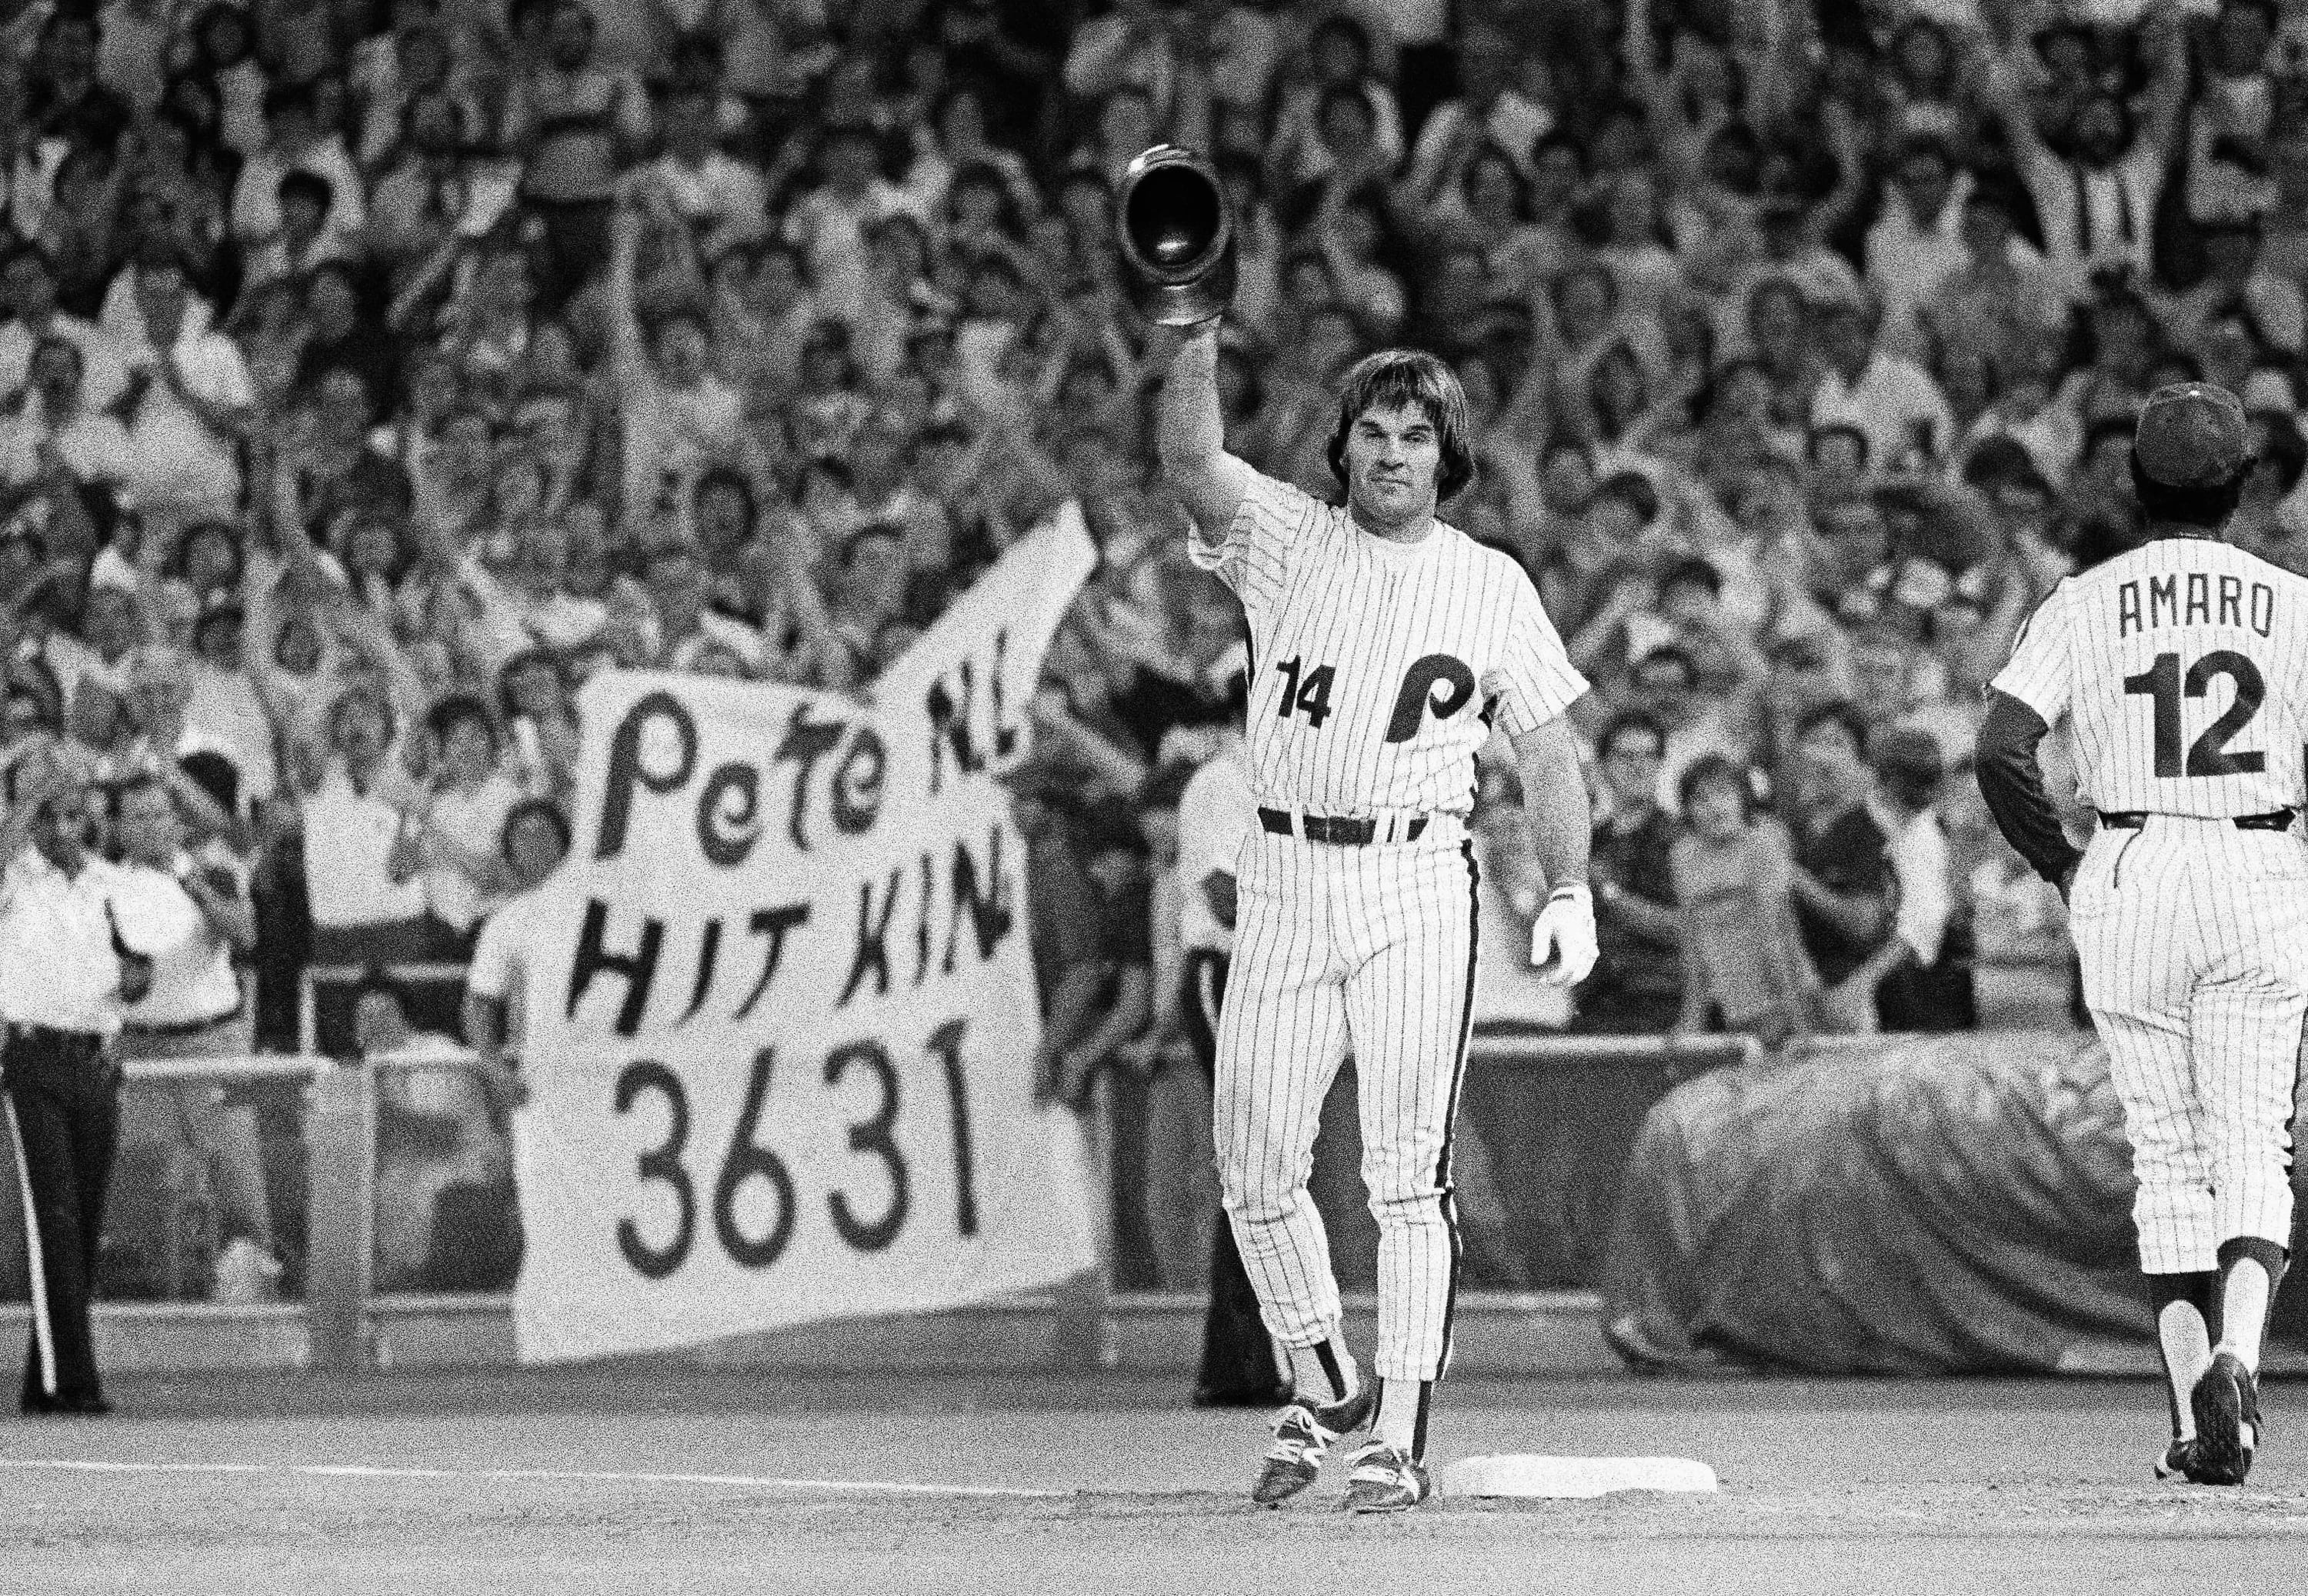 Pete Rose is still pretty much the same at 80 years old